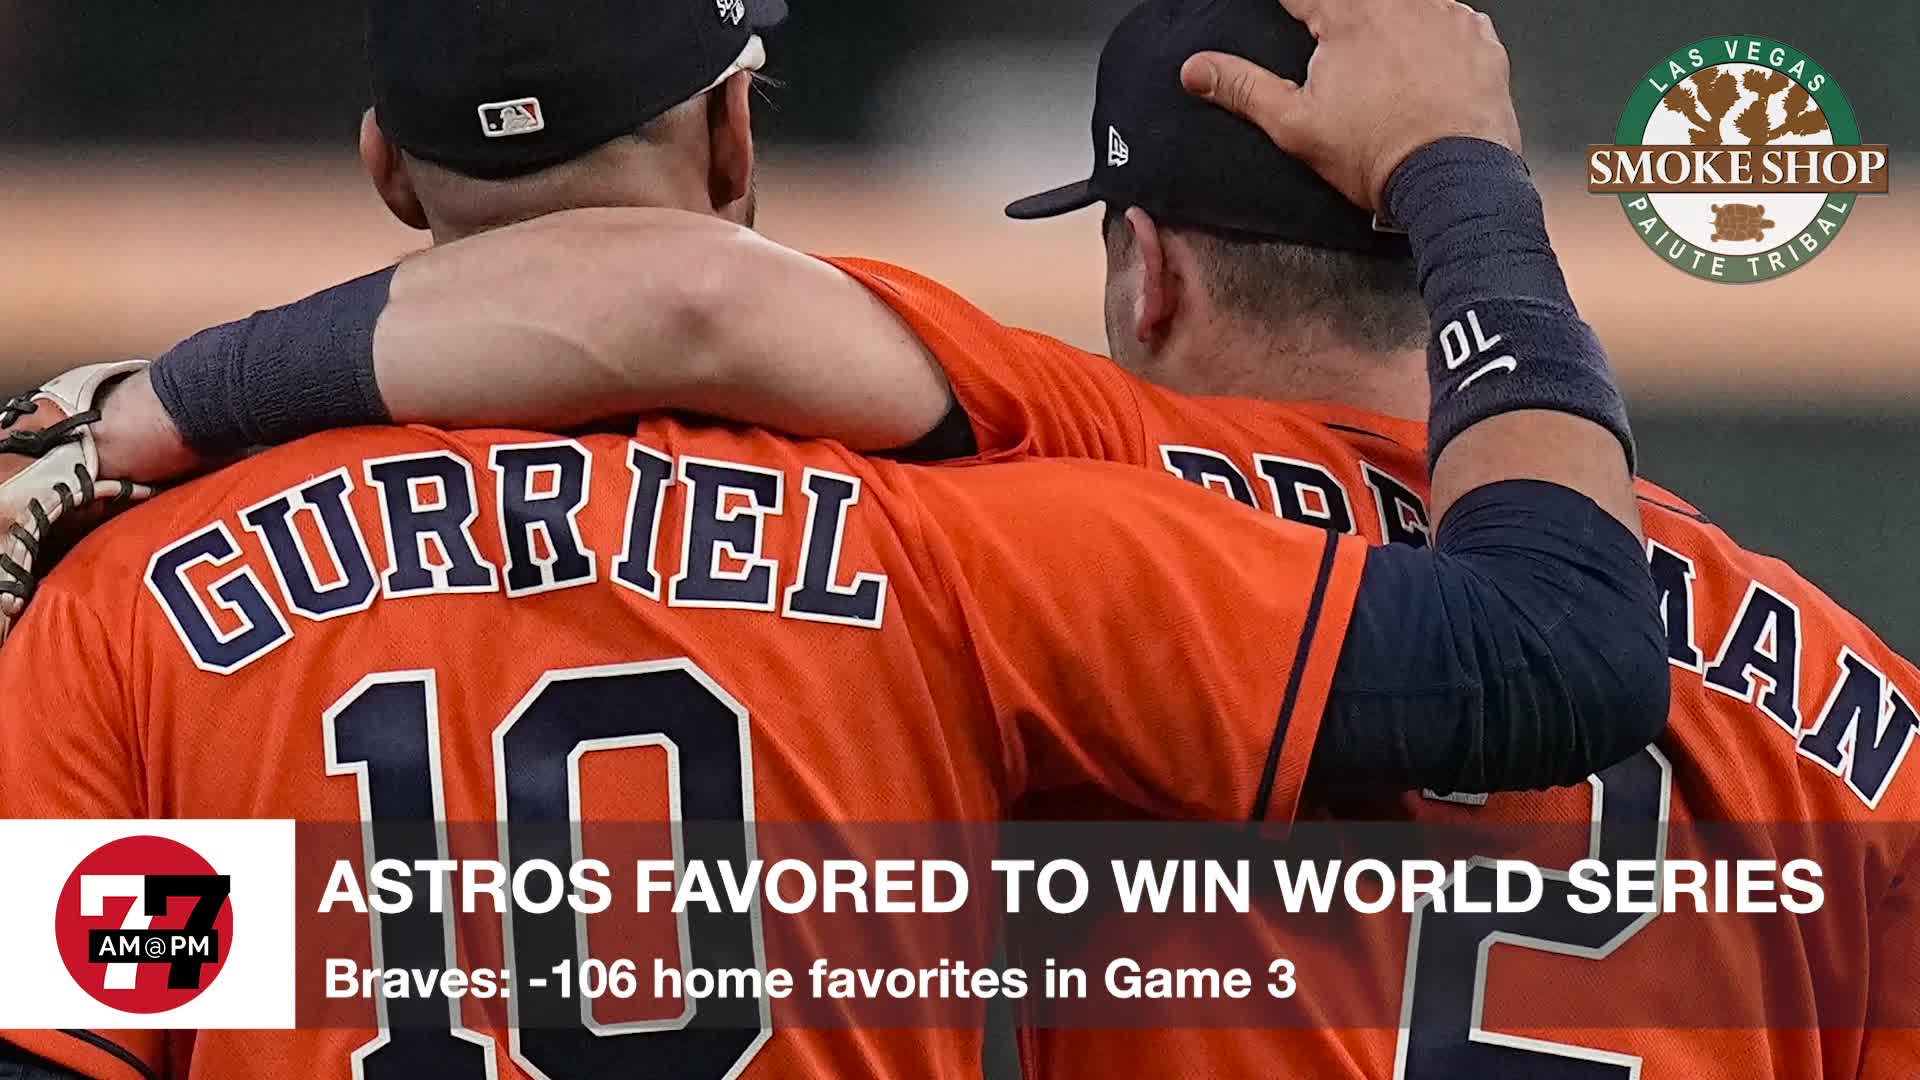 Houston Astros Favored to Win World Series